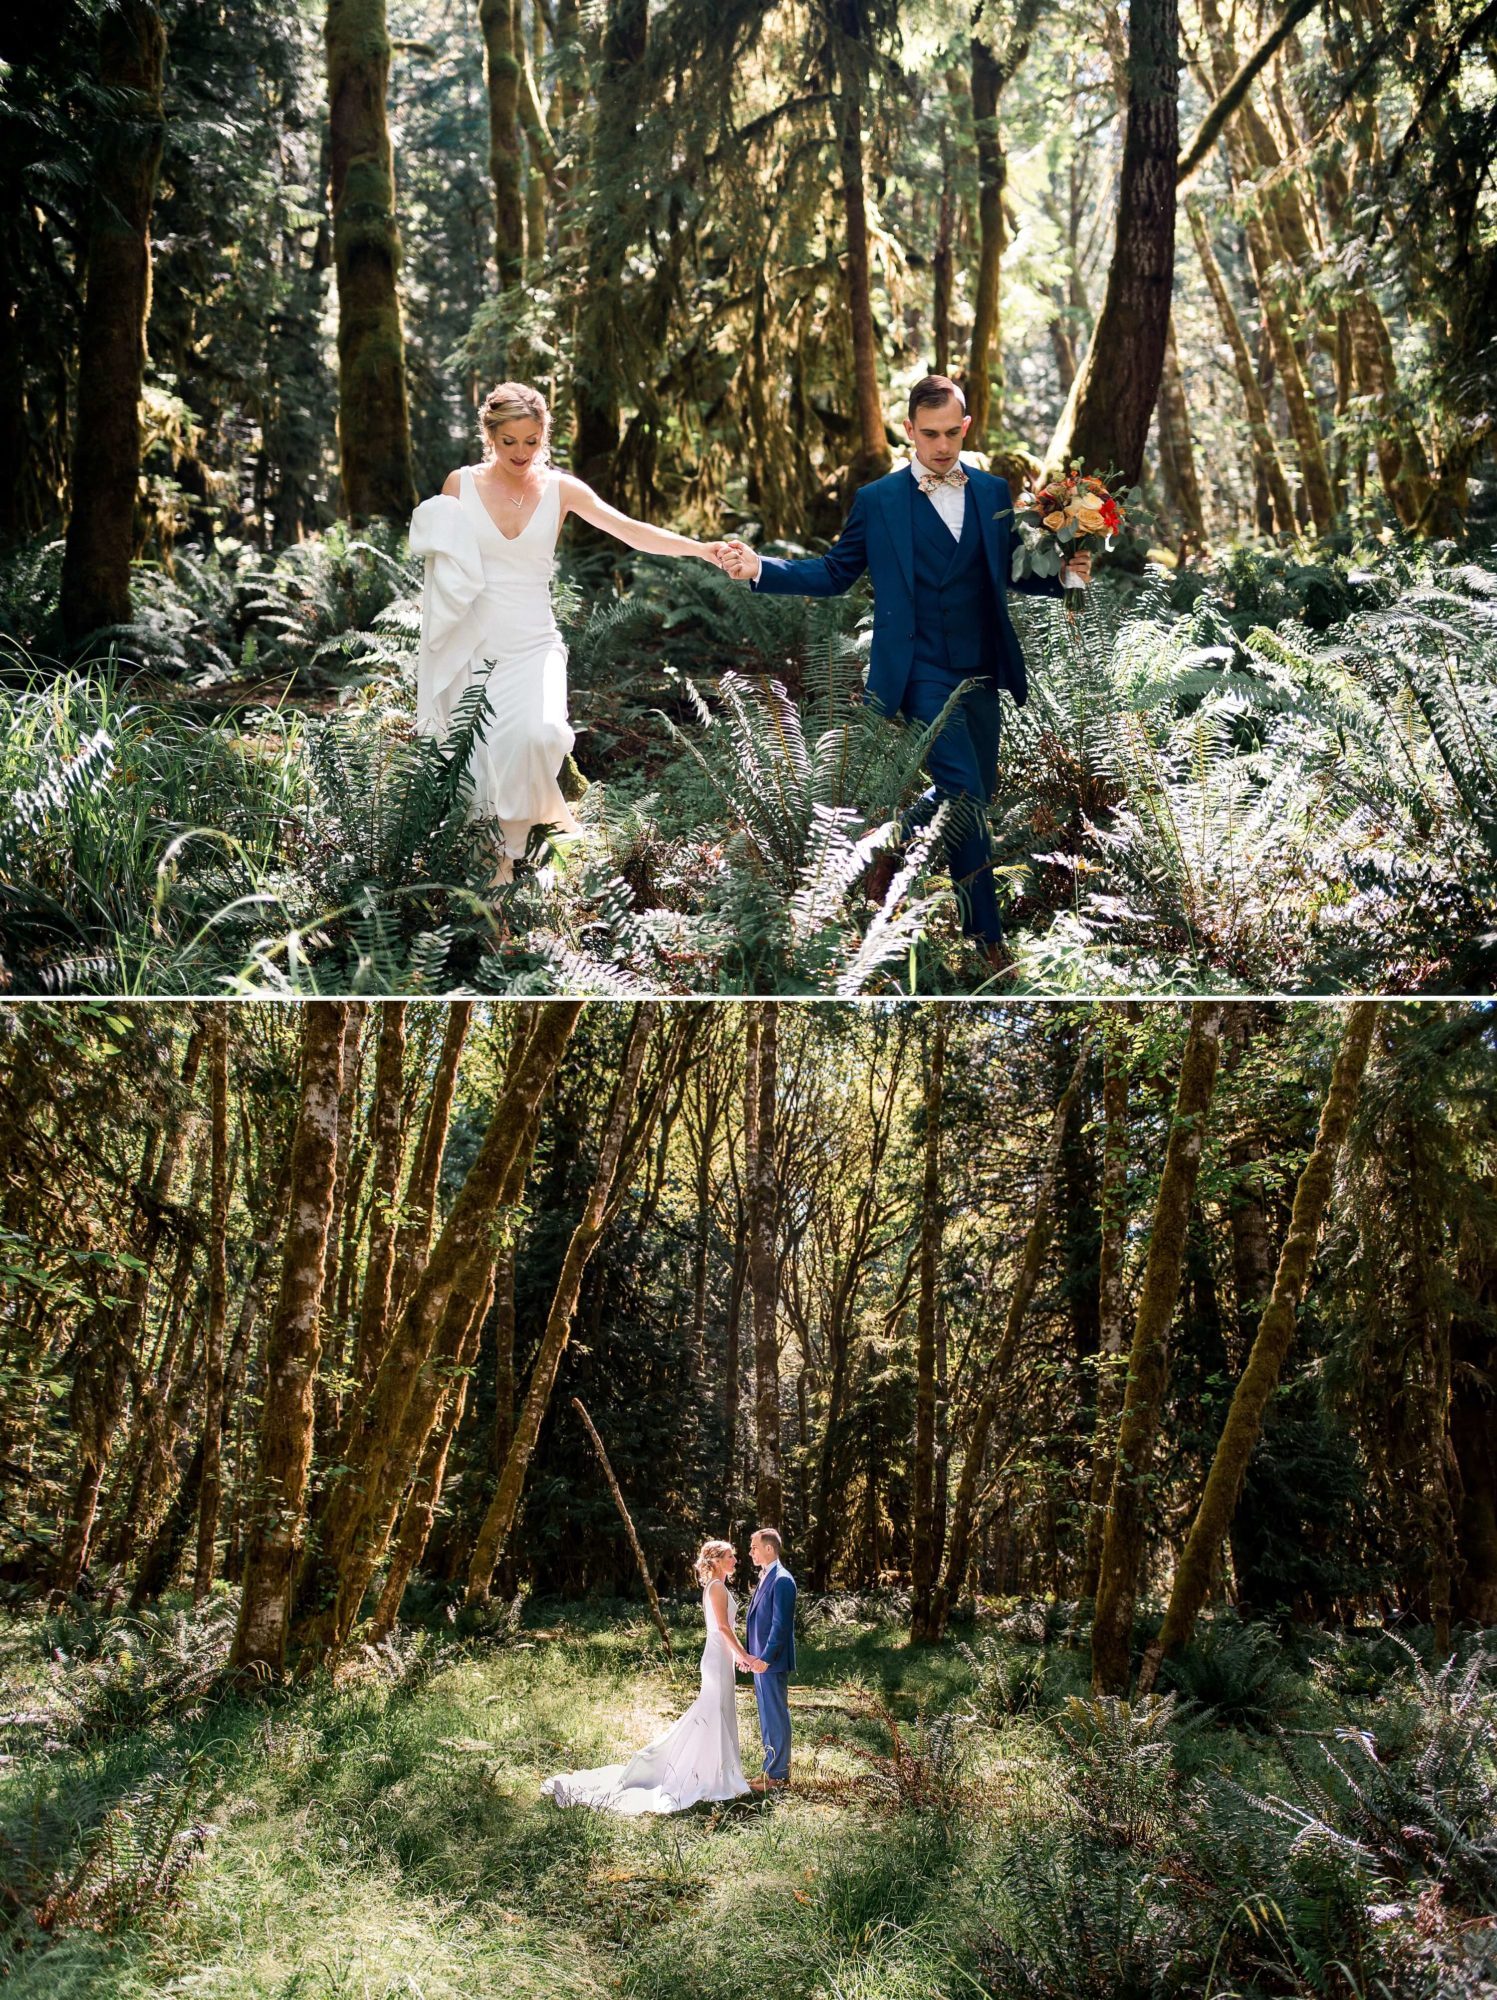 bride and groom walking through the forest and ferns holding hands